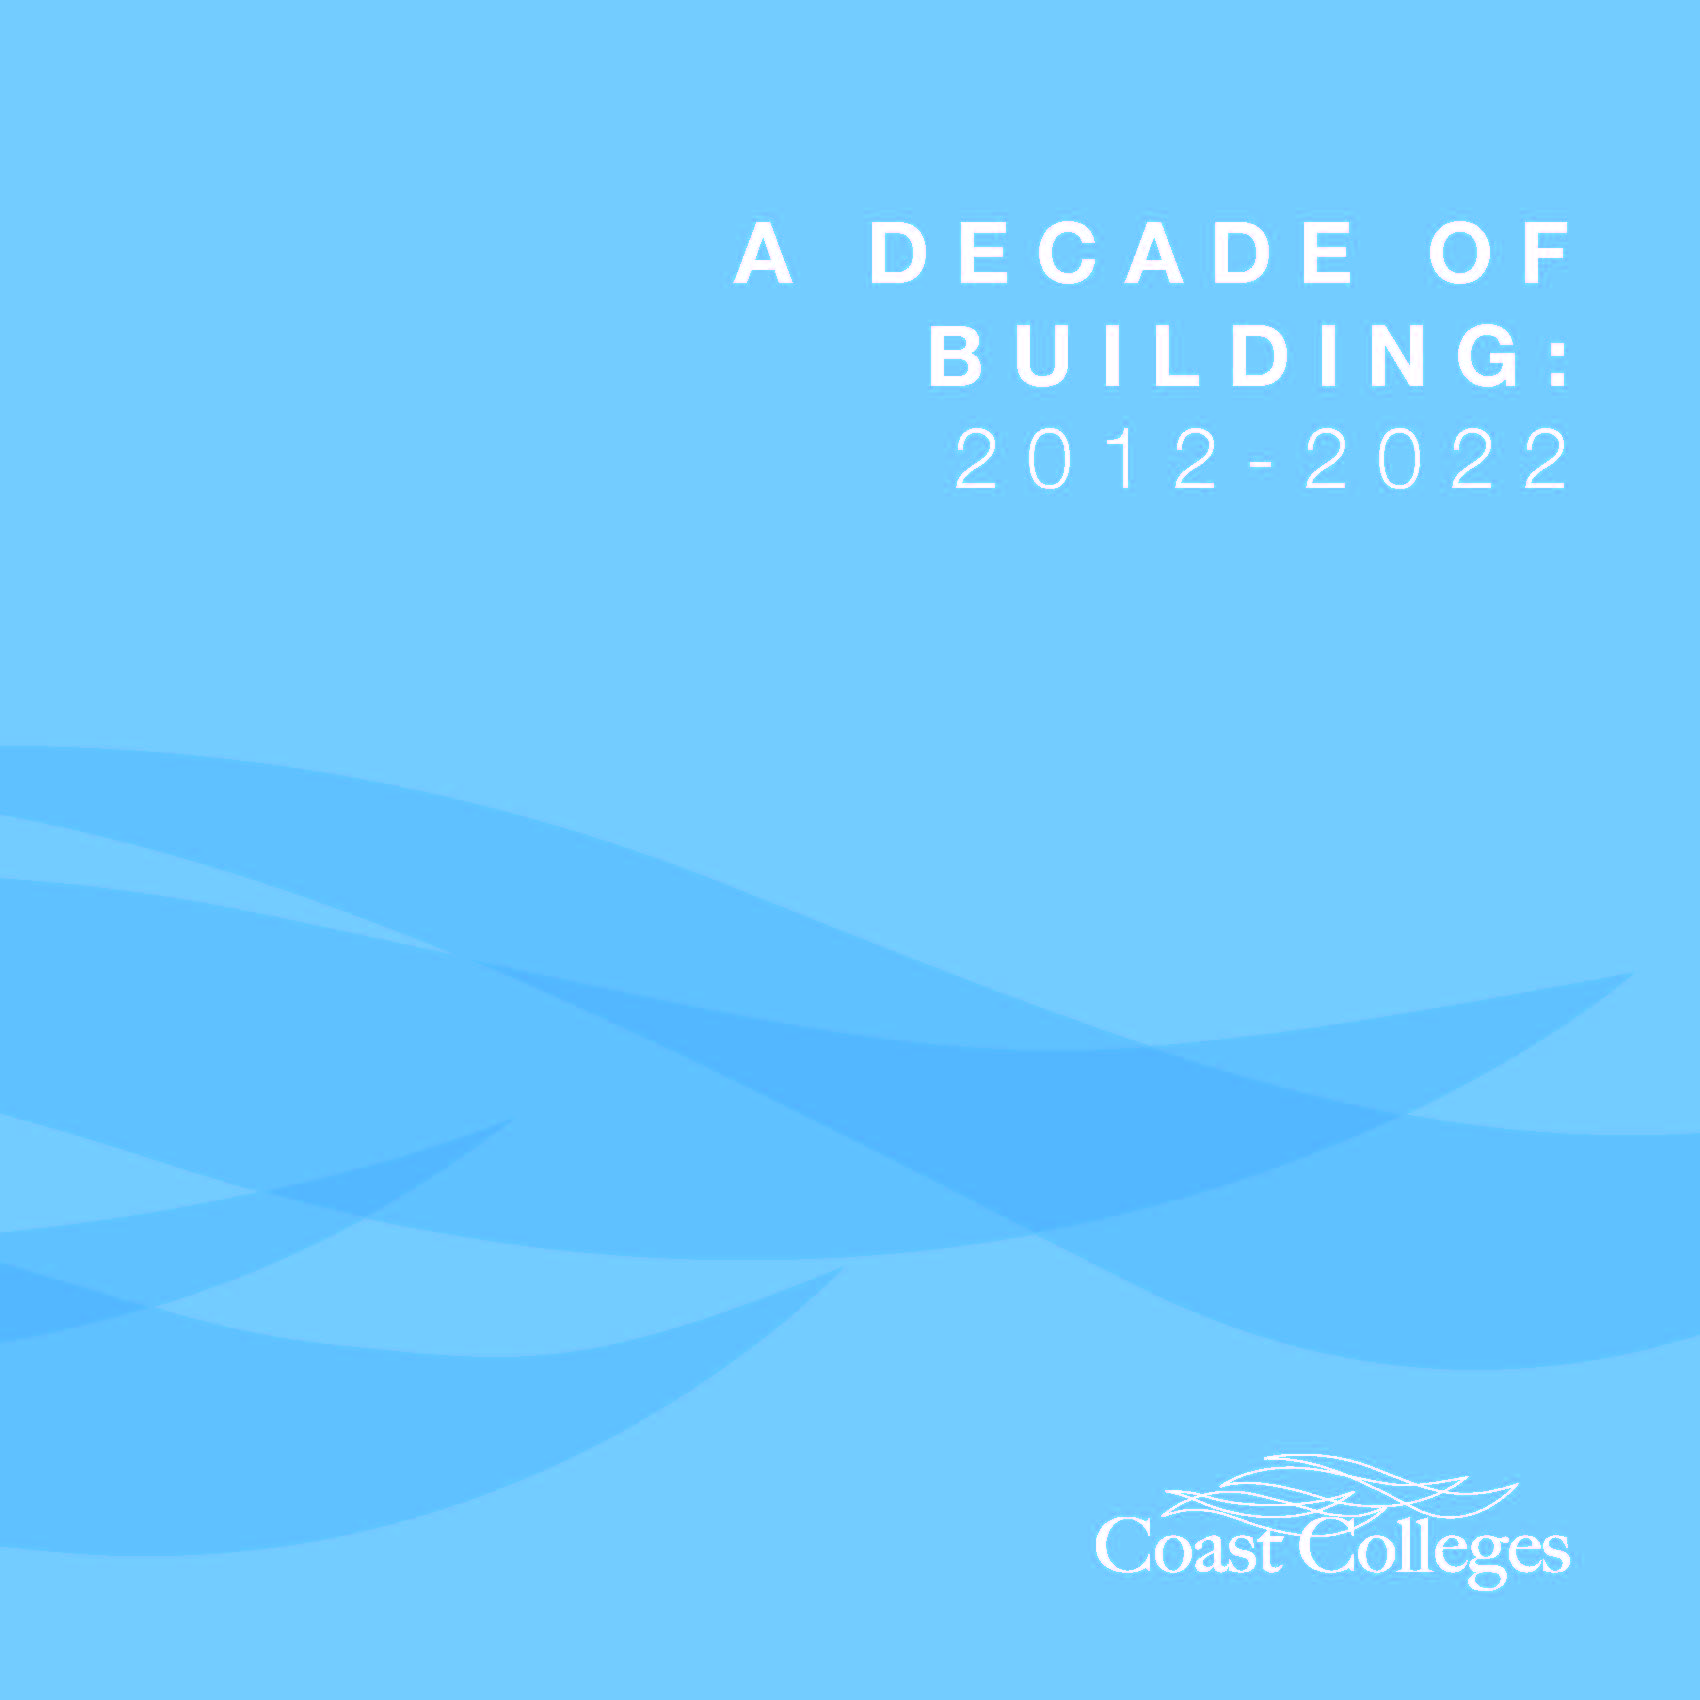 A Decade of Building: 2012-2022 viewbook cover - CCCD waves